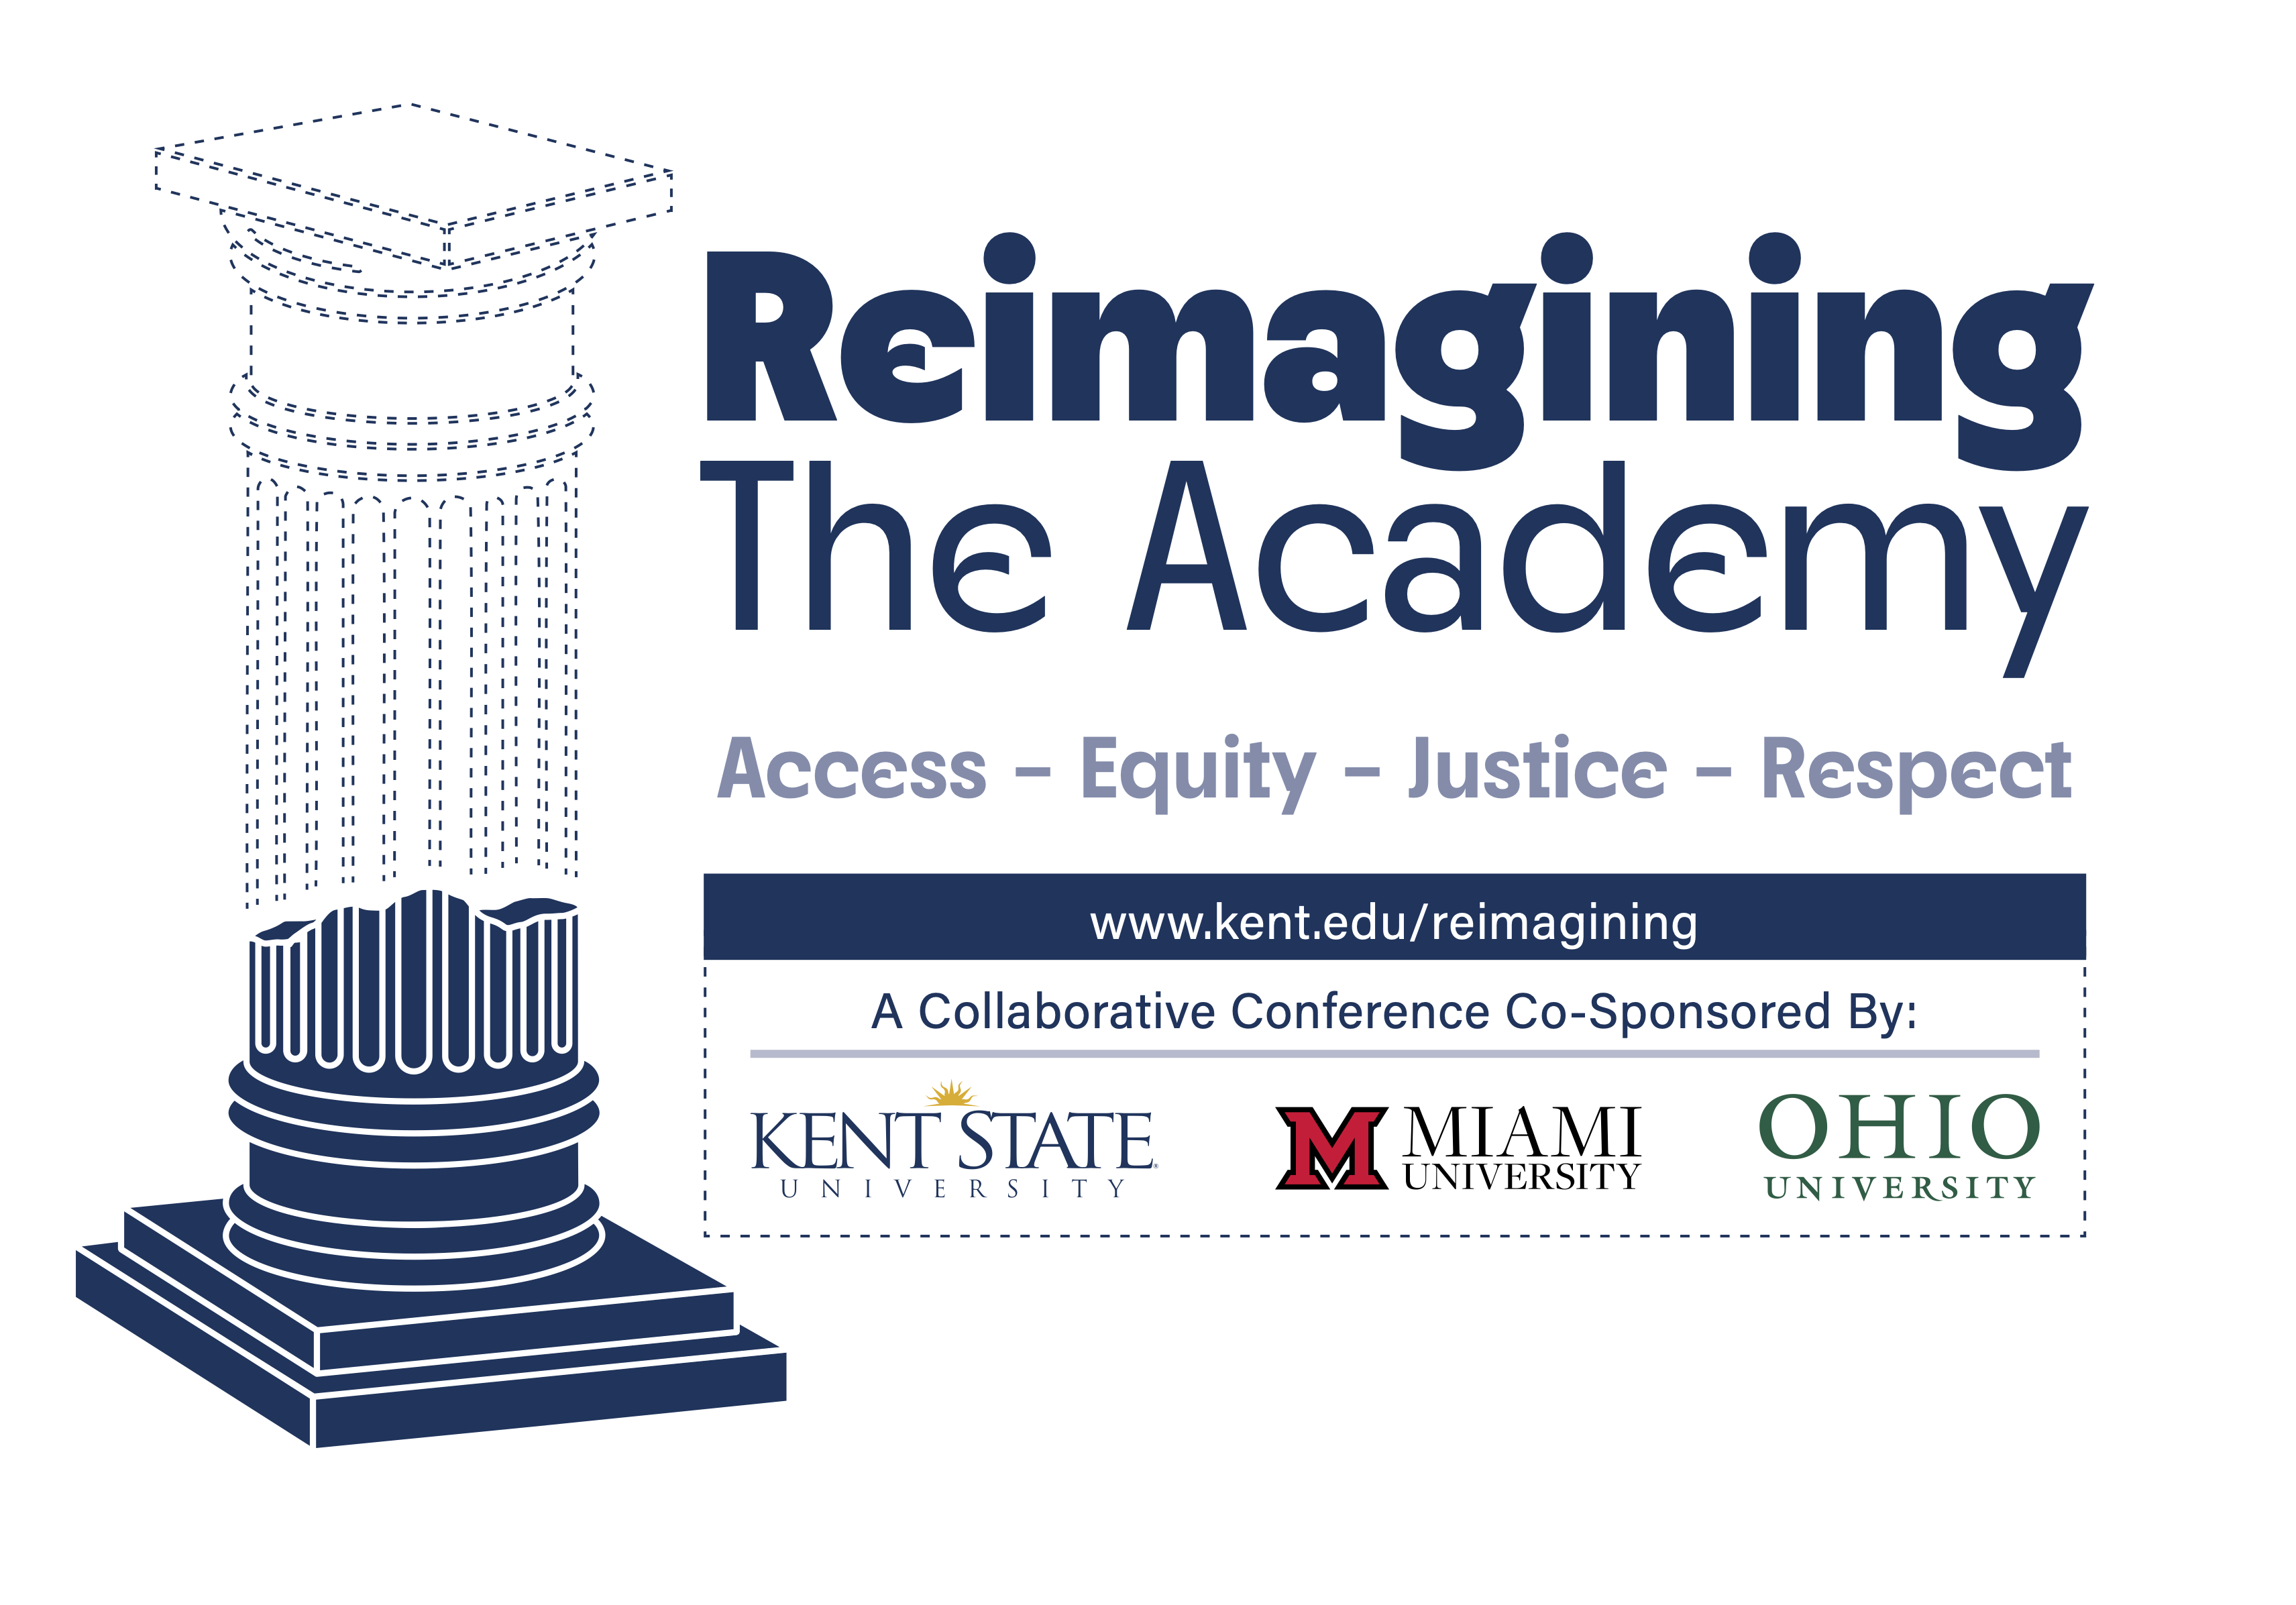 Reimagining the Academy Conference Logo